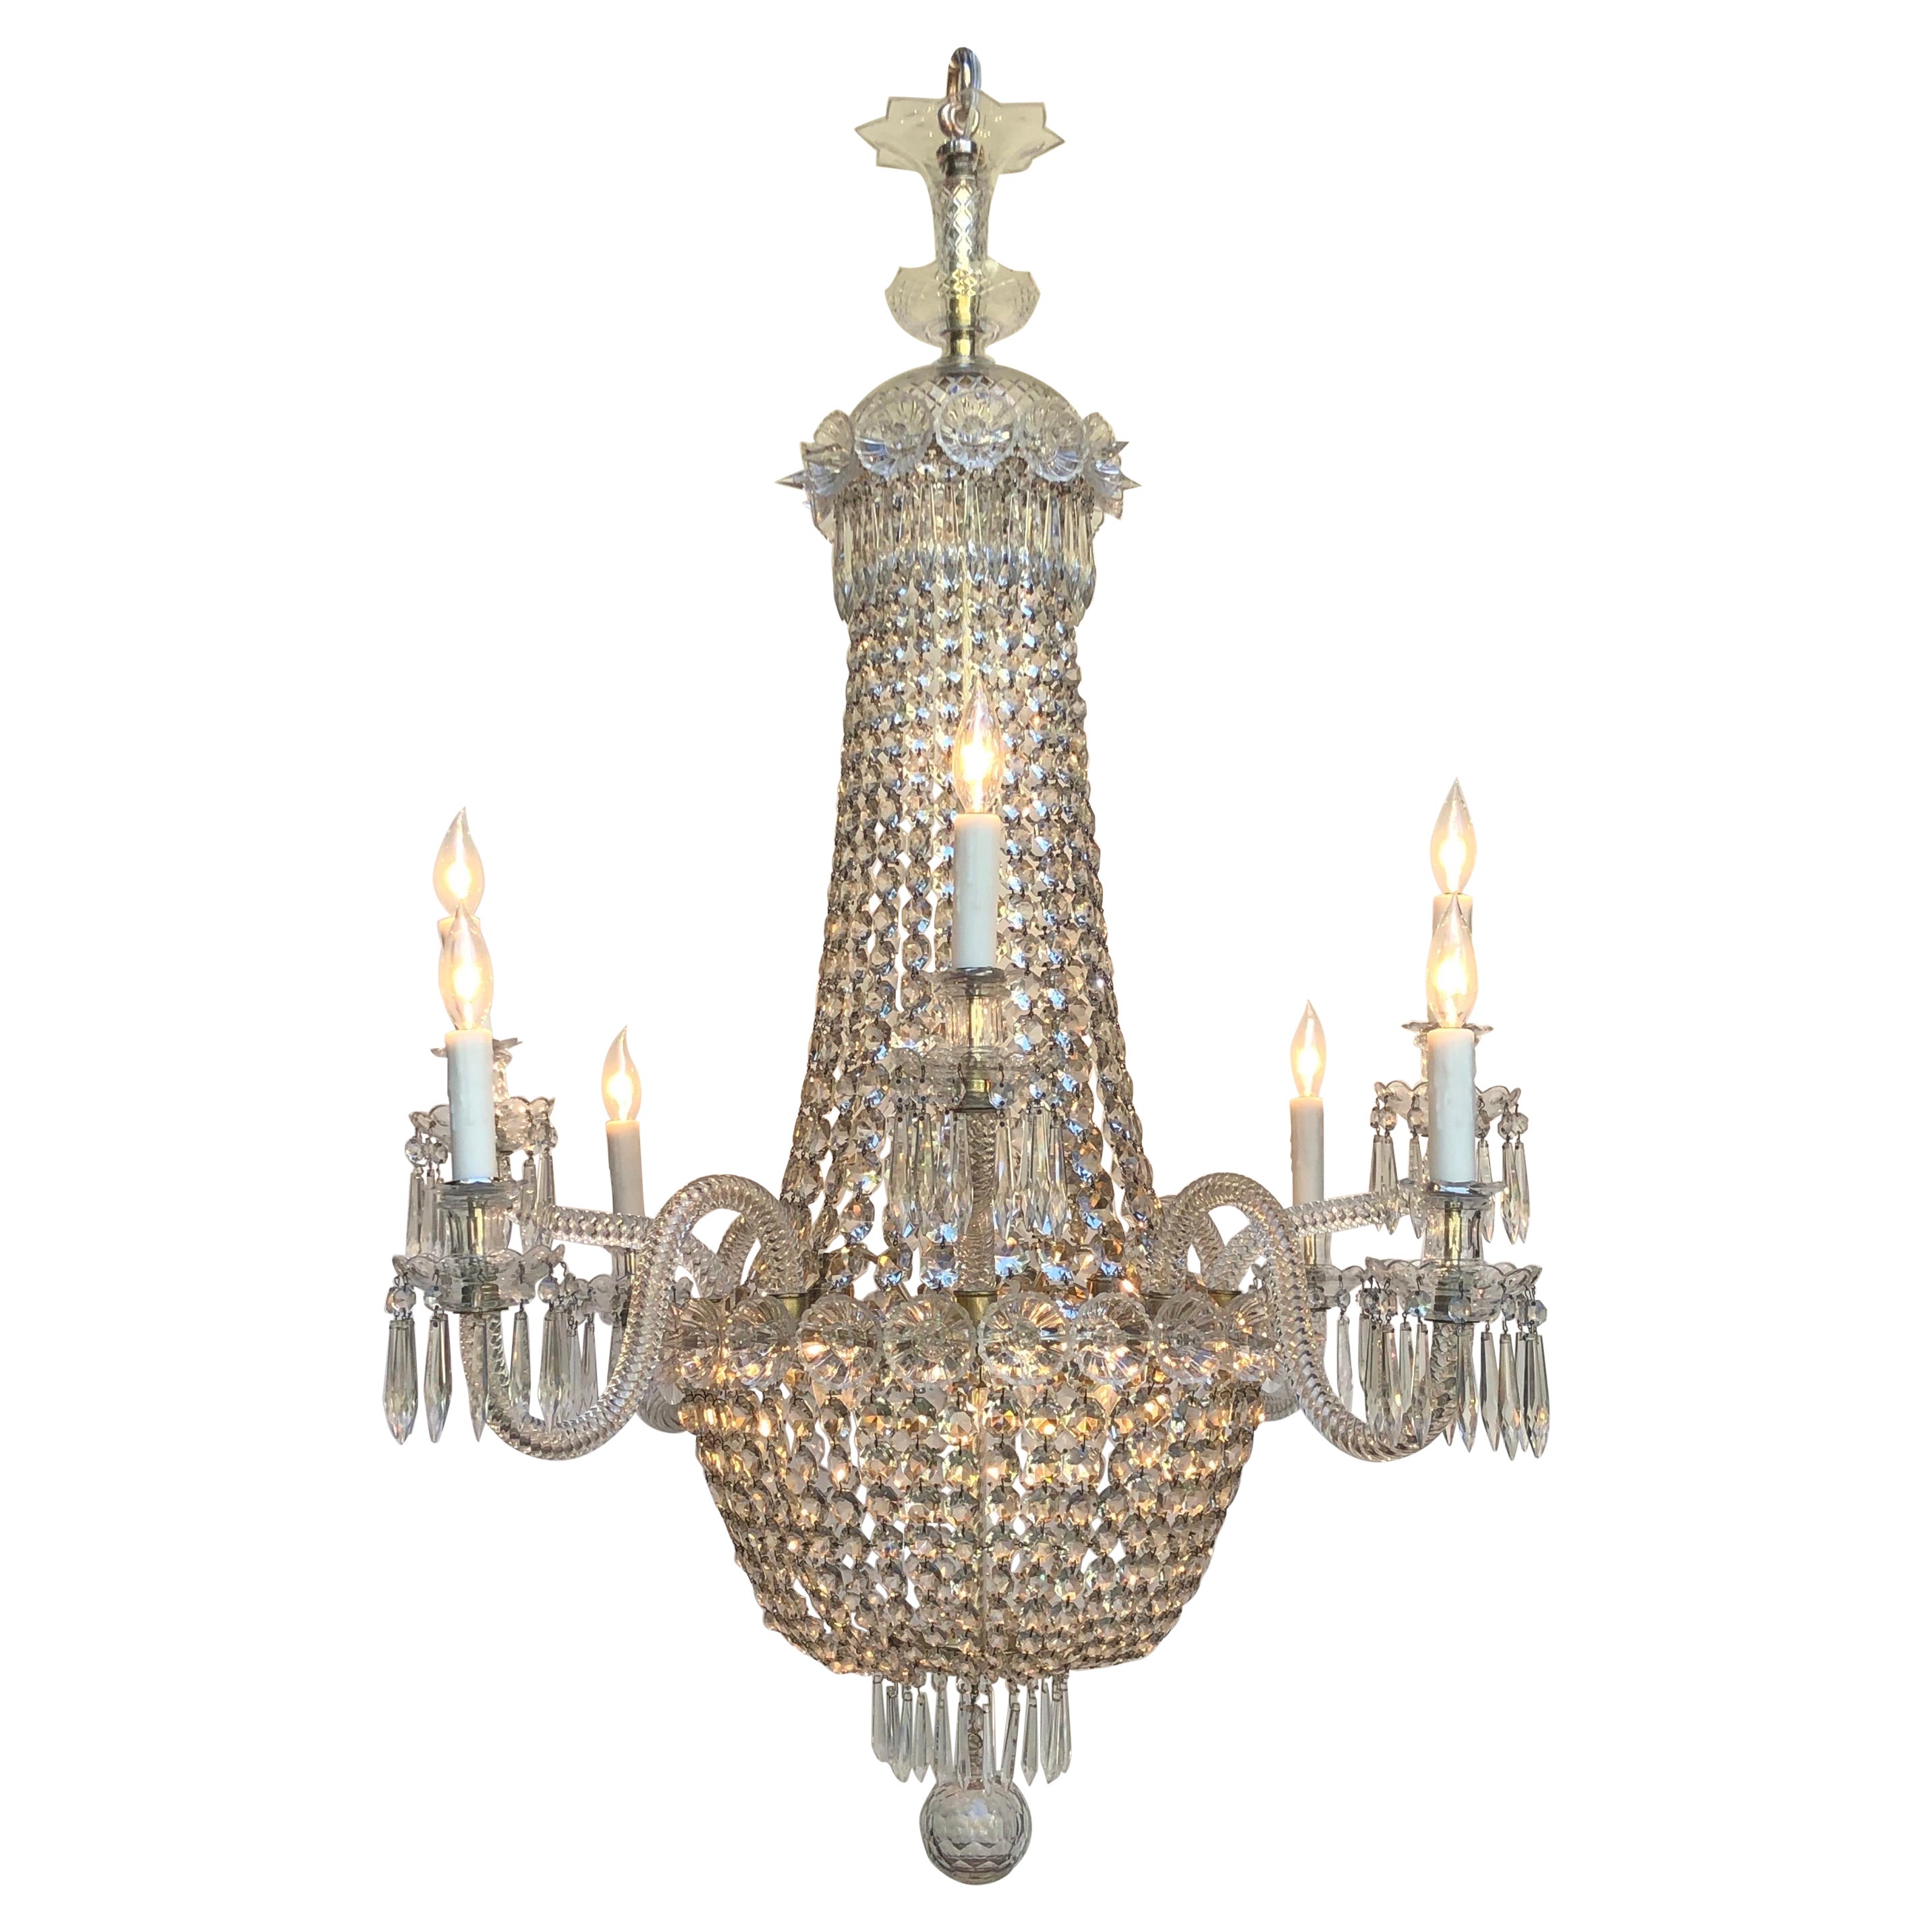 Regency Tent-and-Basket Silver Plate & Crystal Chandelier / Gasolier Eight Light For Sale